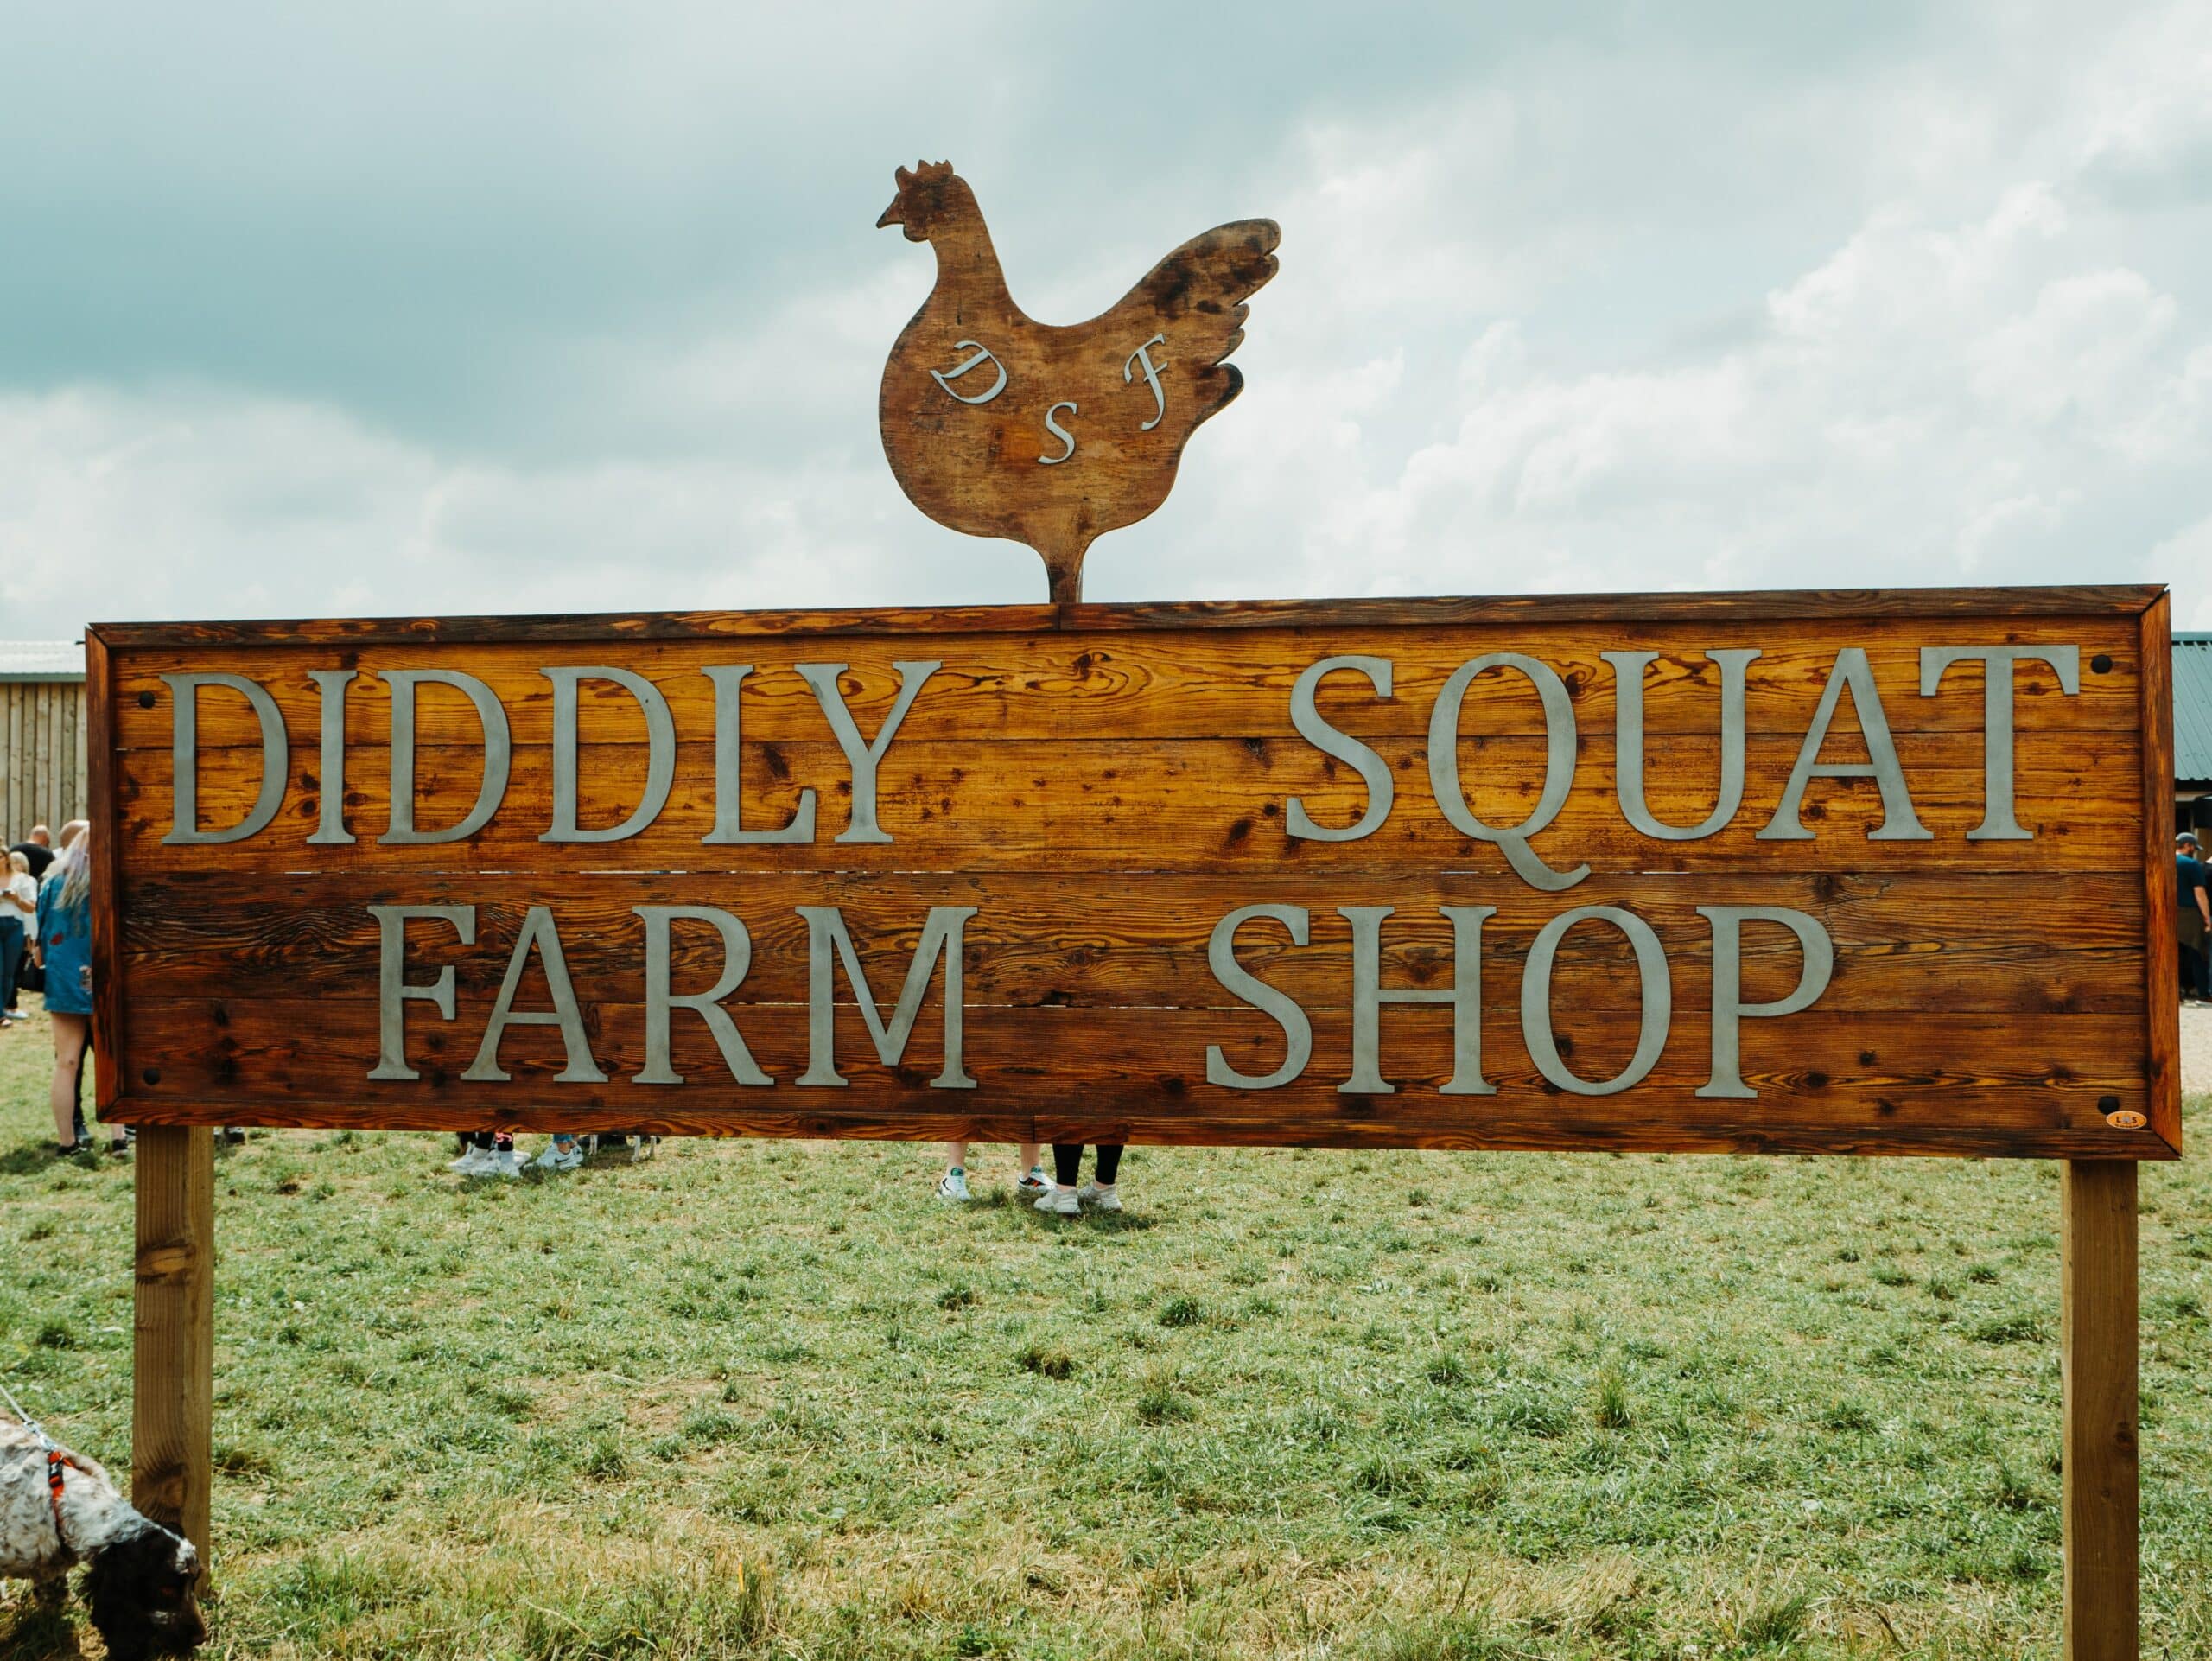 Clarkson's Farm will be diddly squat when his current Amazon deal expires, Matt Seymour on Unsplash